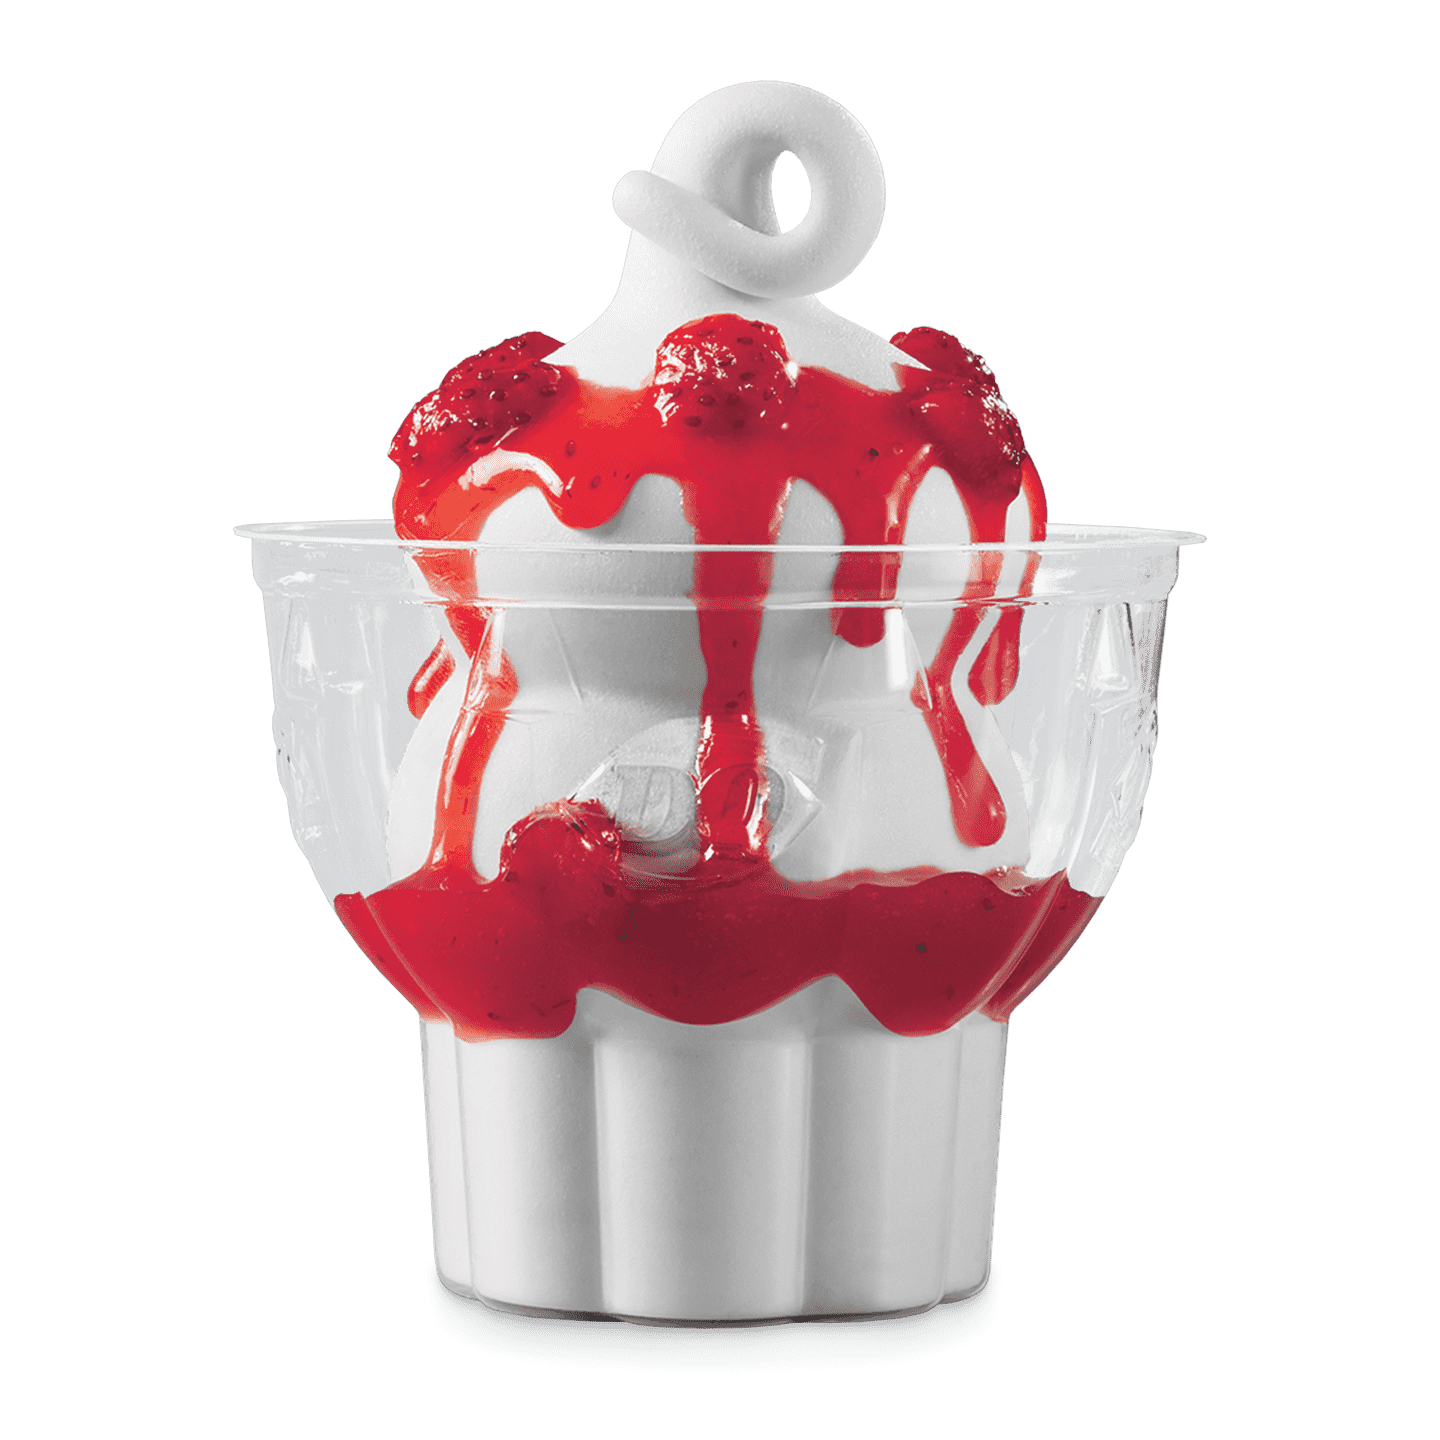 Small Sundae - 2 for $4 Dairy Queen ® Menu.